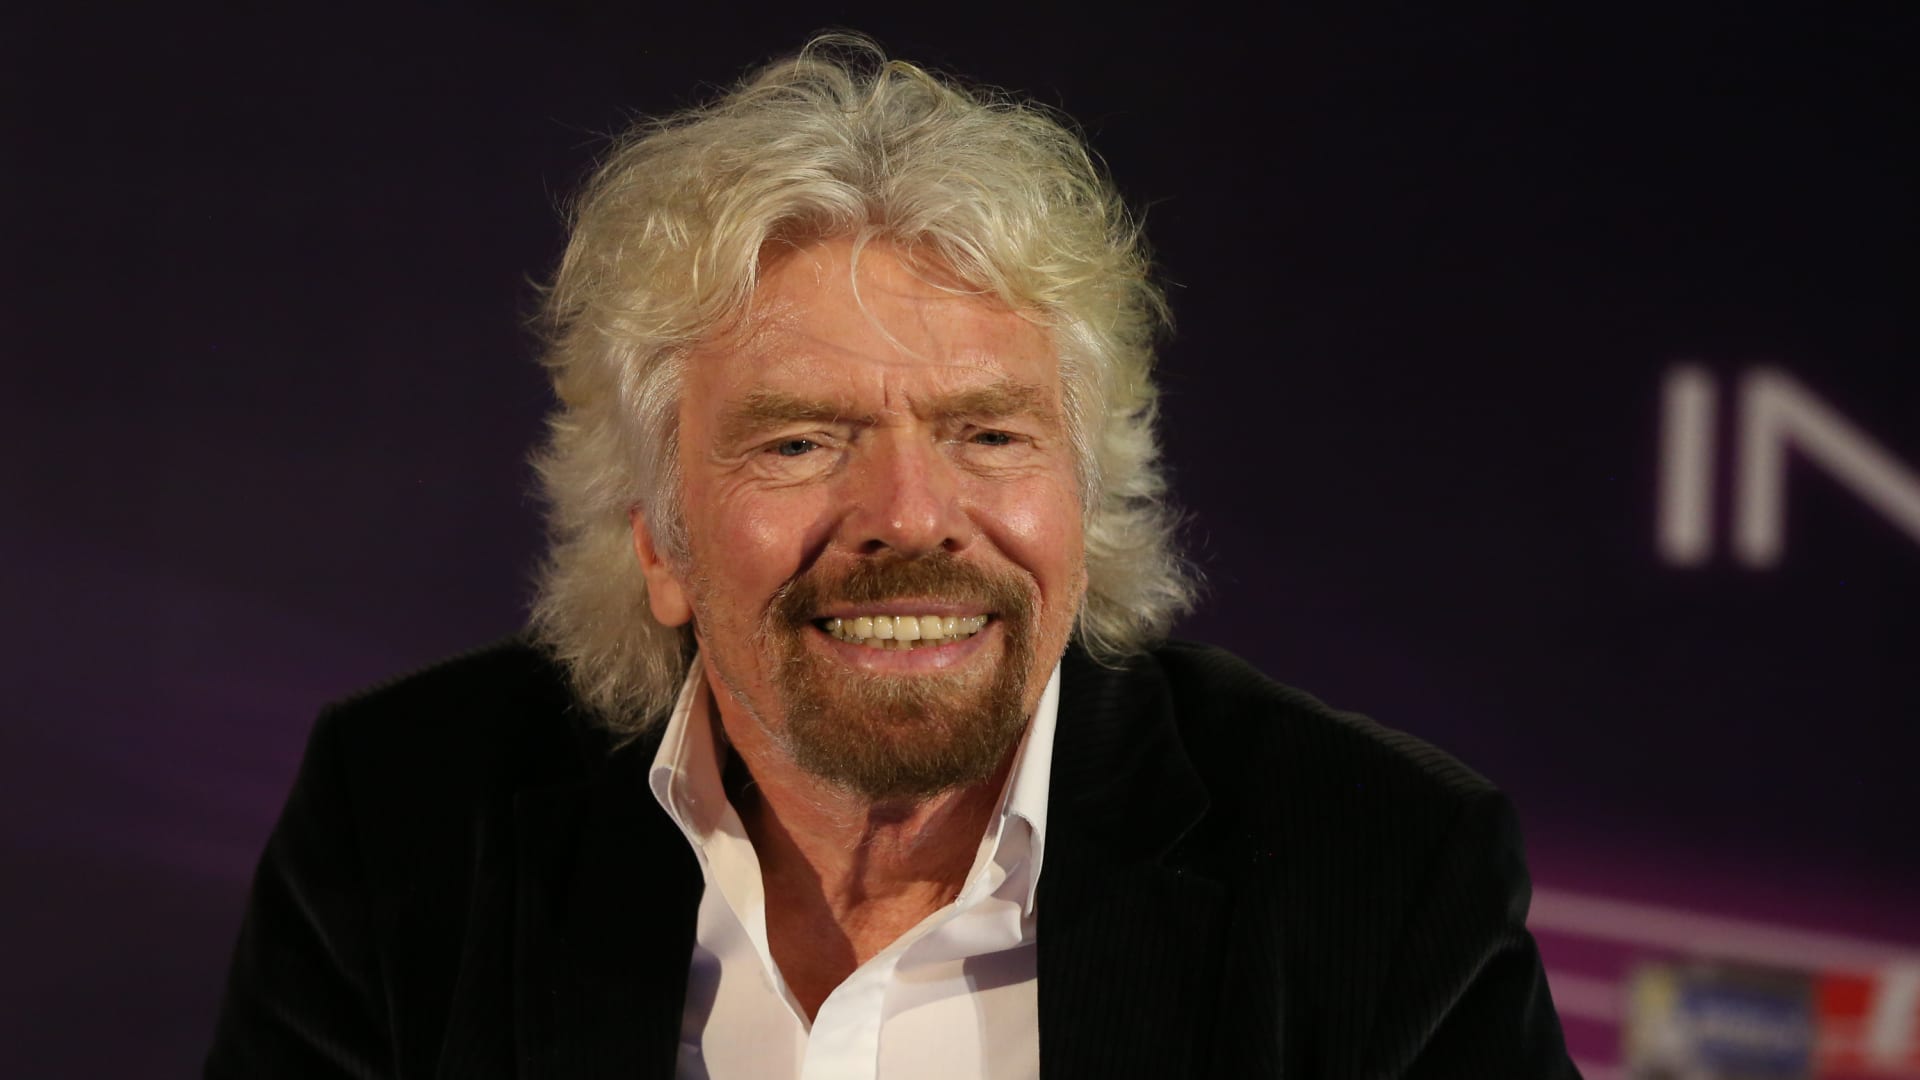 Richard Branson, Michelle Obama and other top leaders use this scheduling trick that could double your productivity